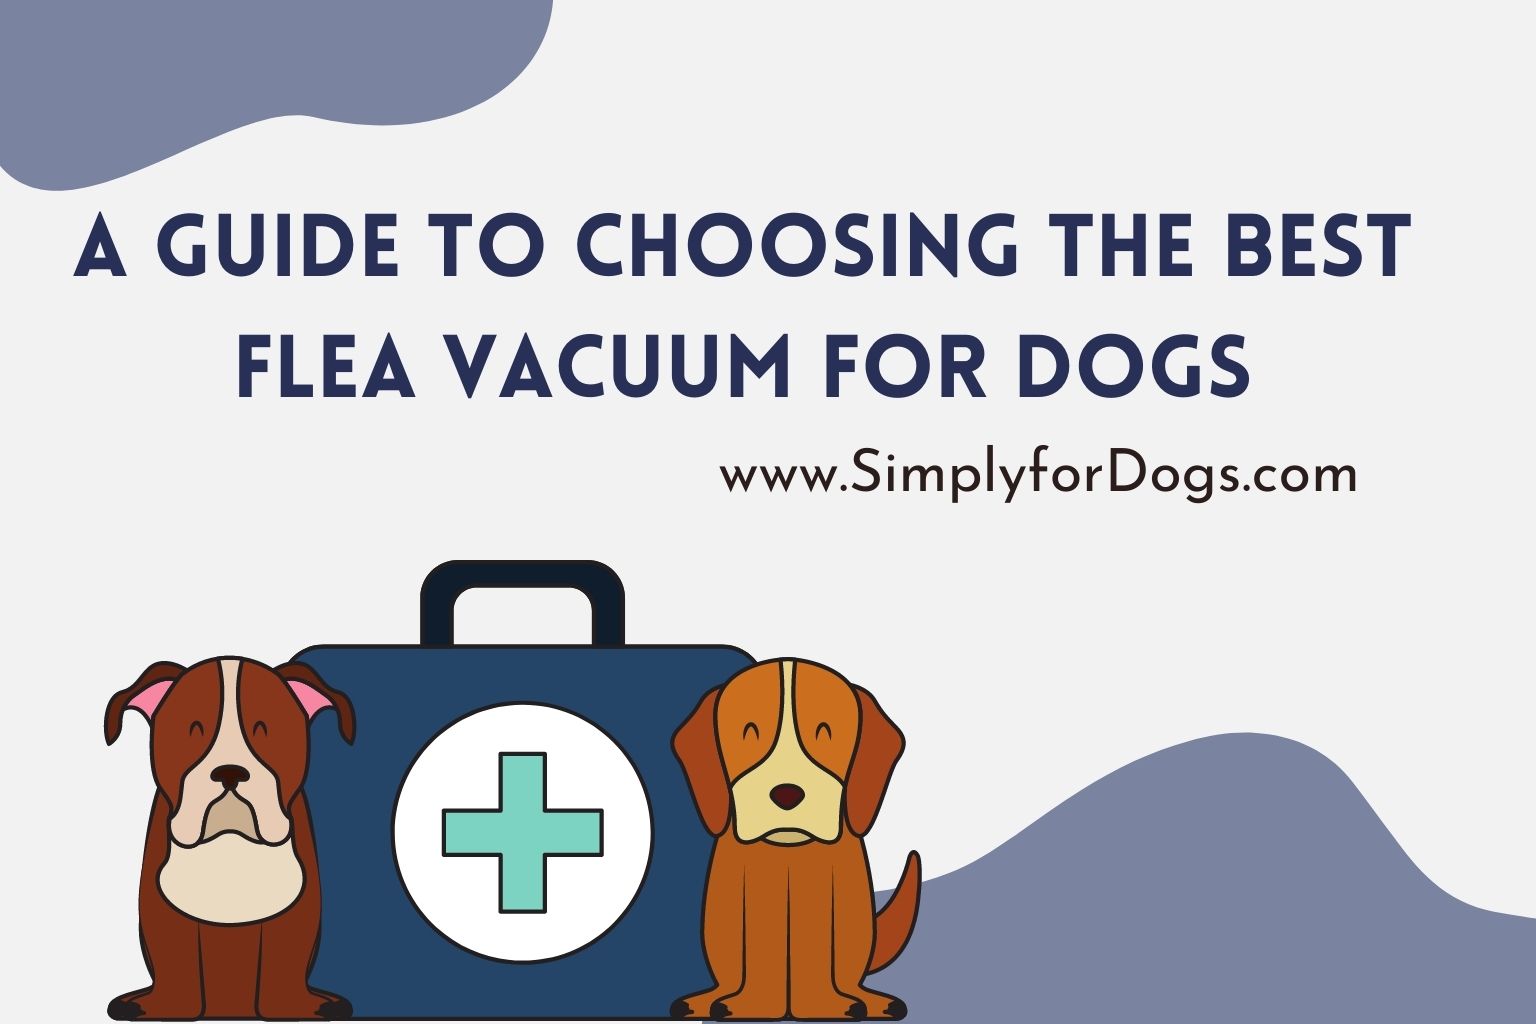 A Guide to Choosing the Best Flea Vacuum for Dogs